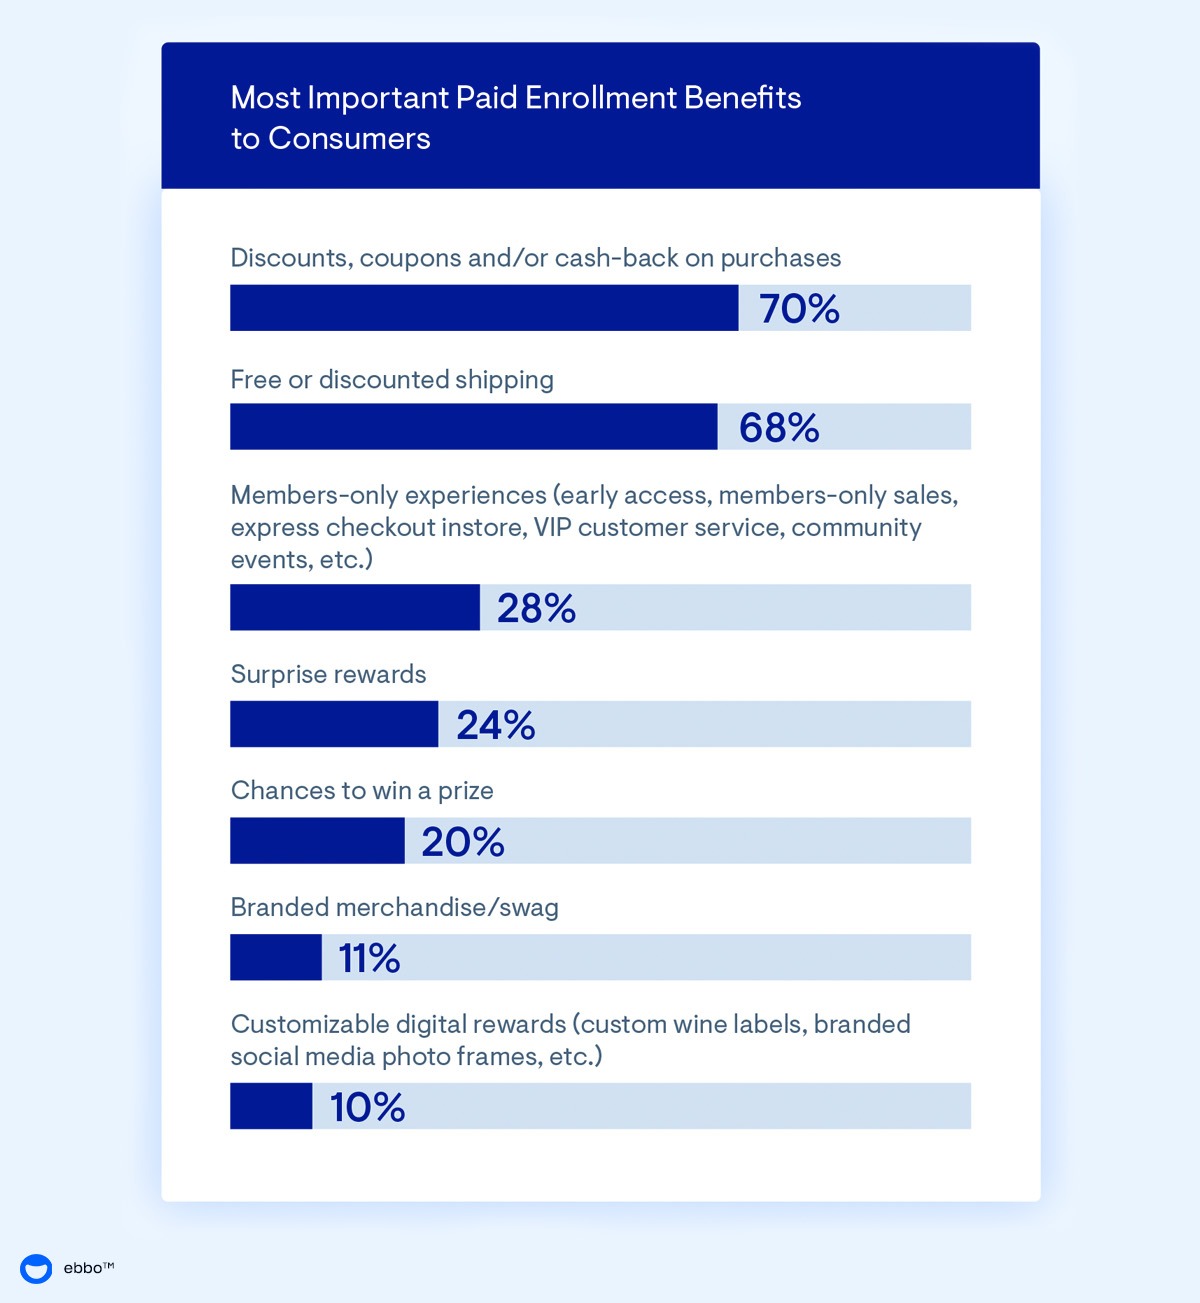 Chart showing the most valuable paid enrollment benefits to consumers